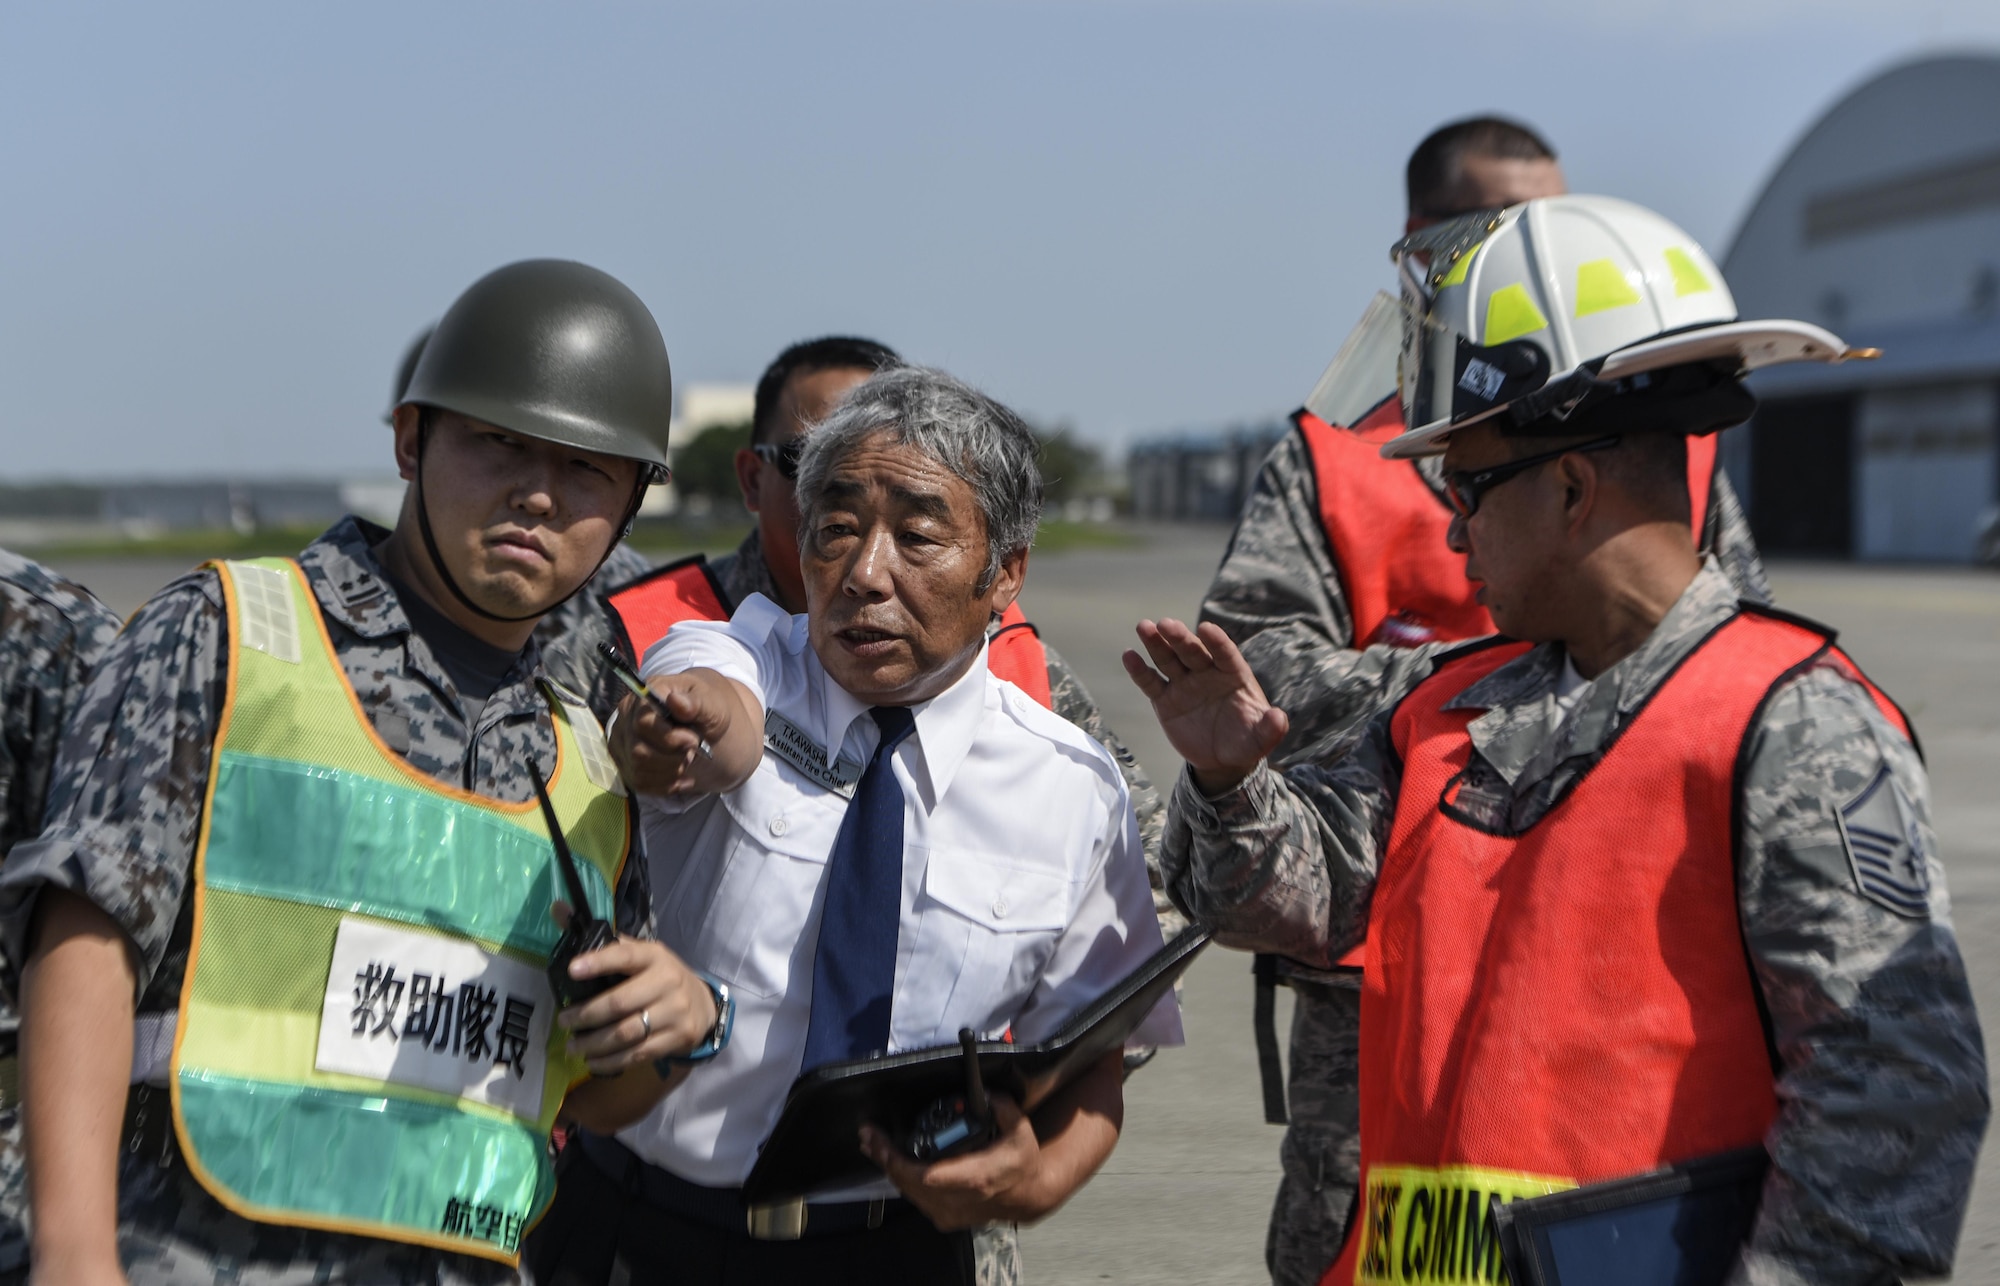 Japan Air Self Defense Force member 1st Lt. Murase Toshia, left, and Kawashima Toshinobu, an assistant fire chief, center, discuss with U.S. Air Force Master Sgt. Francis Tagalog, a deputy fire chief and incident commander assigned to 35th Civil Engineer Squadron, the situation and roles of the firemen from both the JASDF and USAF during a bilateral emergency management exercise at Misawa Air Base, Japan, Aug. 31, 2016. During the planning stages both sides established the counterparts, chain of command and how all agencies are going to respond. (U.S. Air Force photo by Airman 1st Class Sadie Colbert)